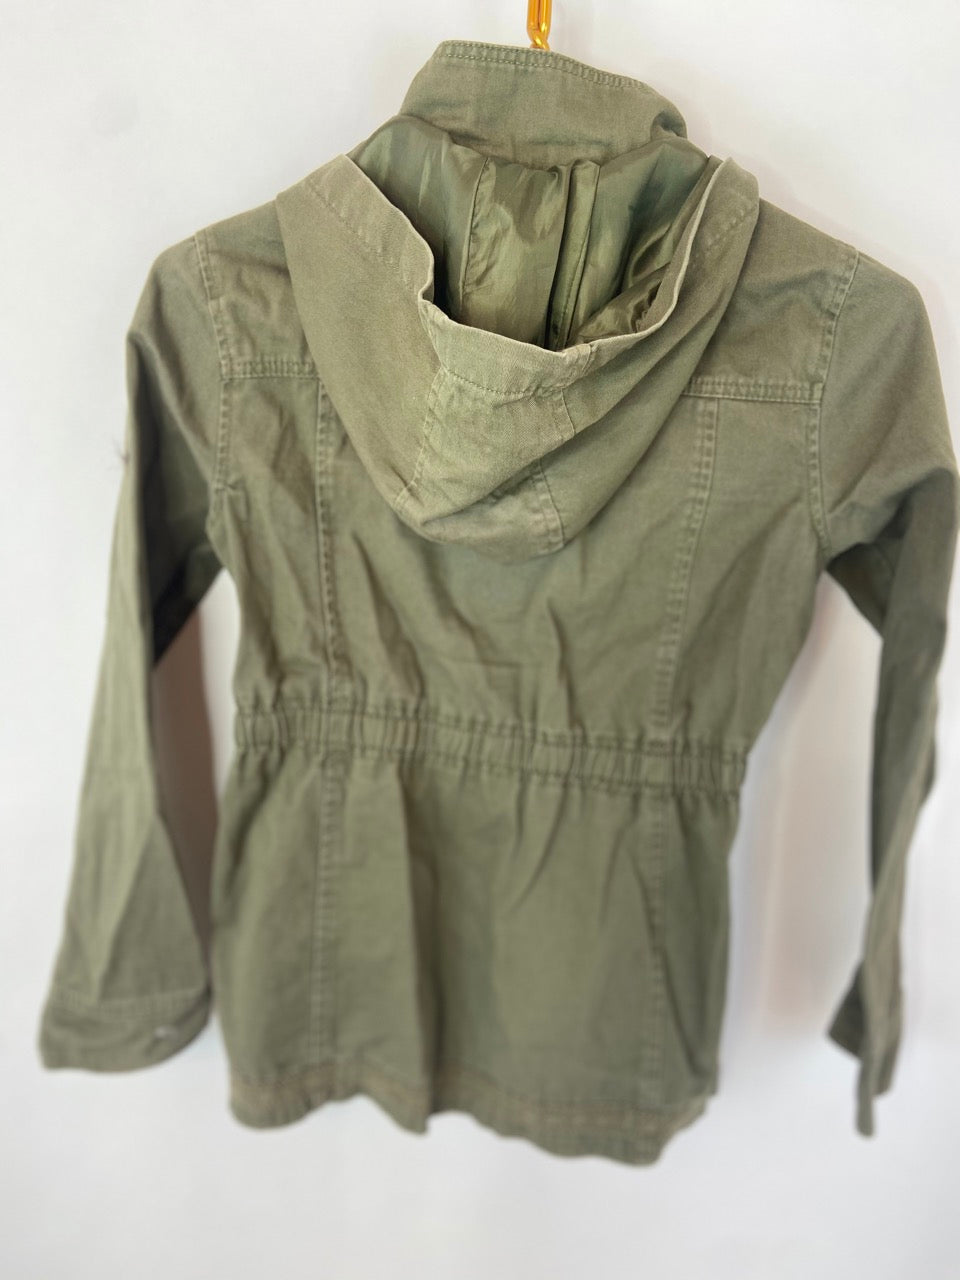 Olive Green Jacket w/ Gold and Lace Detail- Youth L (12)